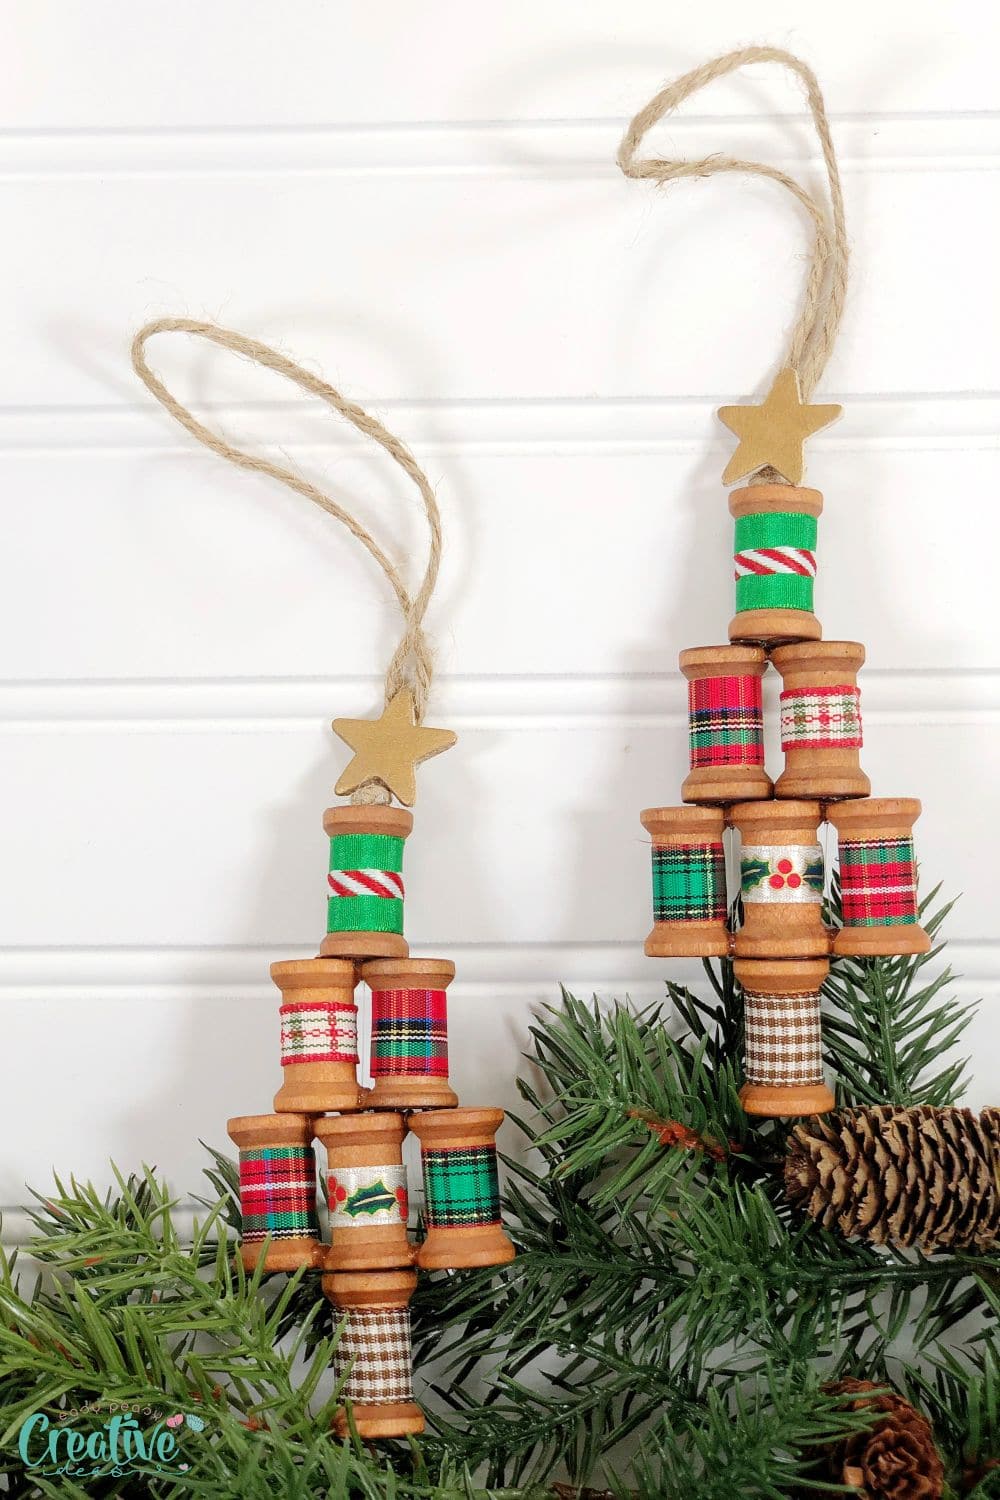 DIY wooden spool ornaments in a Christmas tree